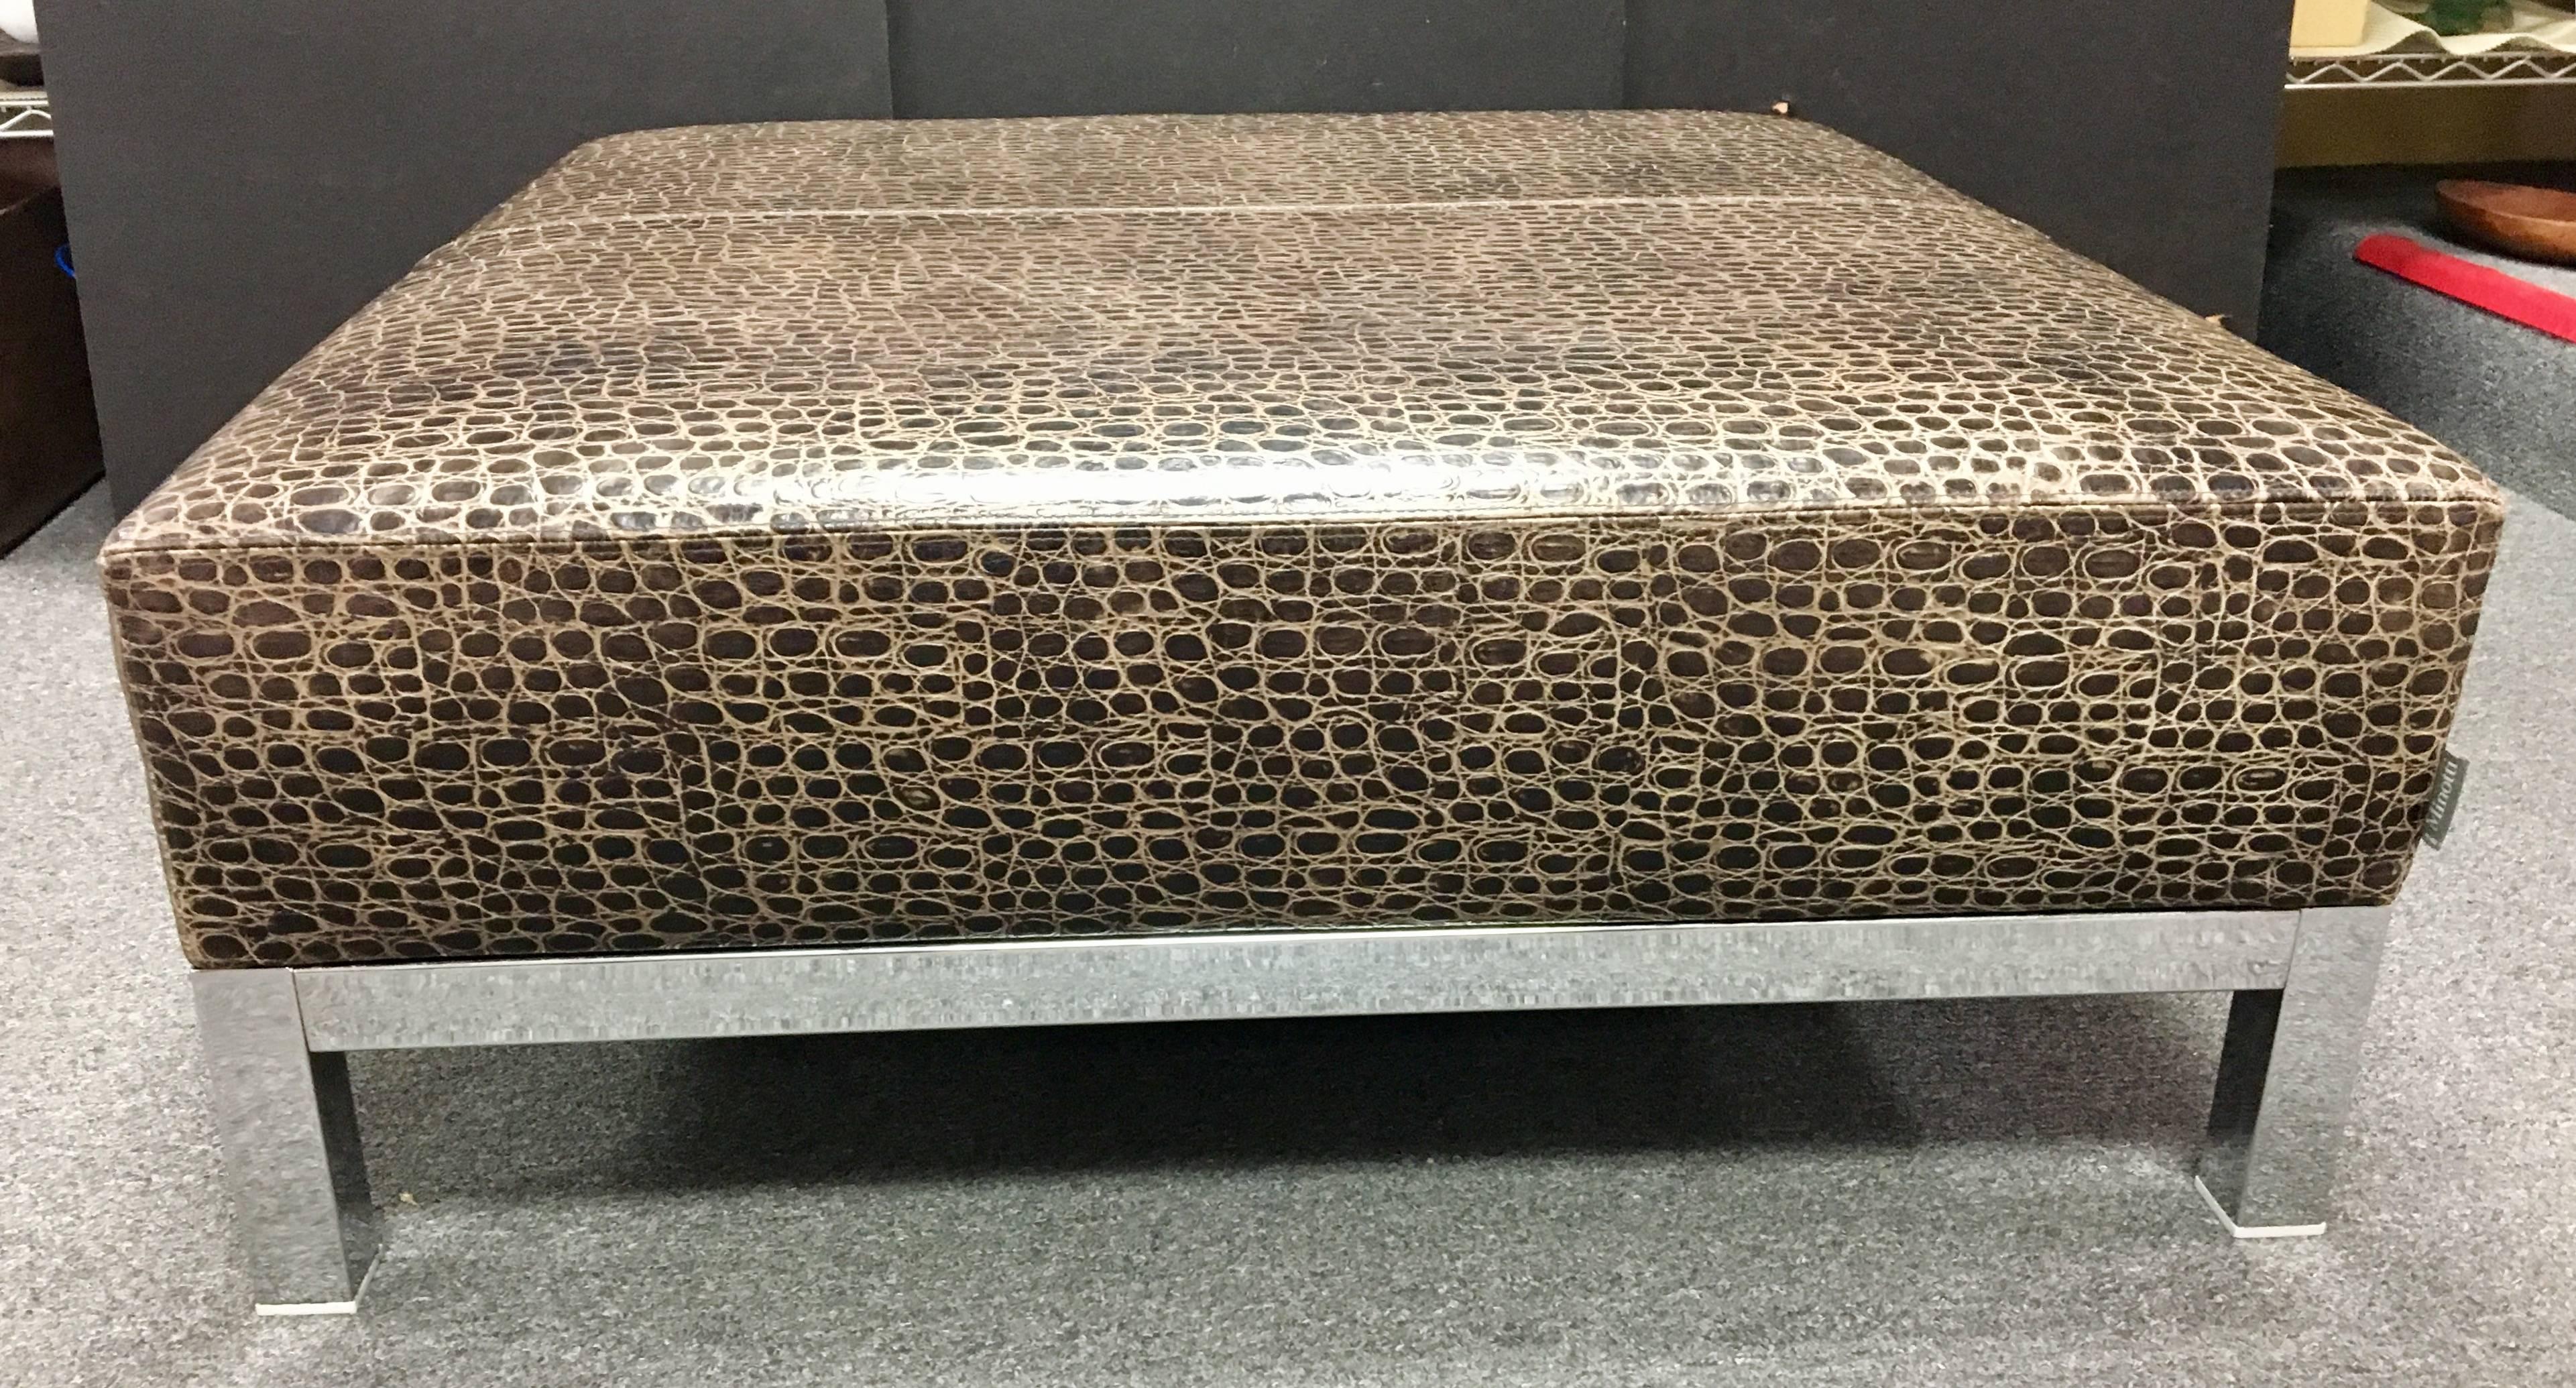 Post-Modern Striking Large Patterned Leather & Chrome Base Coffee Ottoman / Table by Minotti